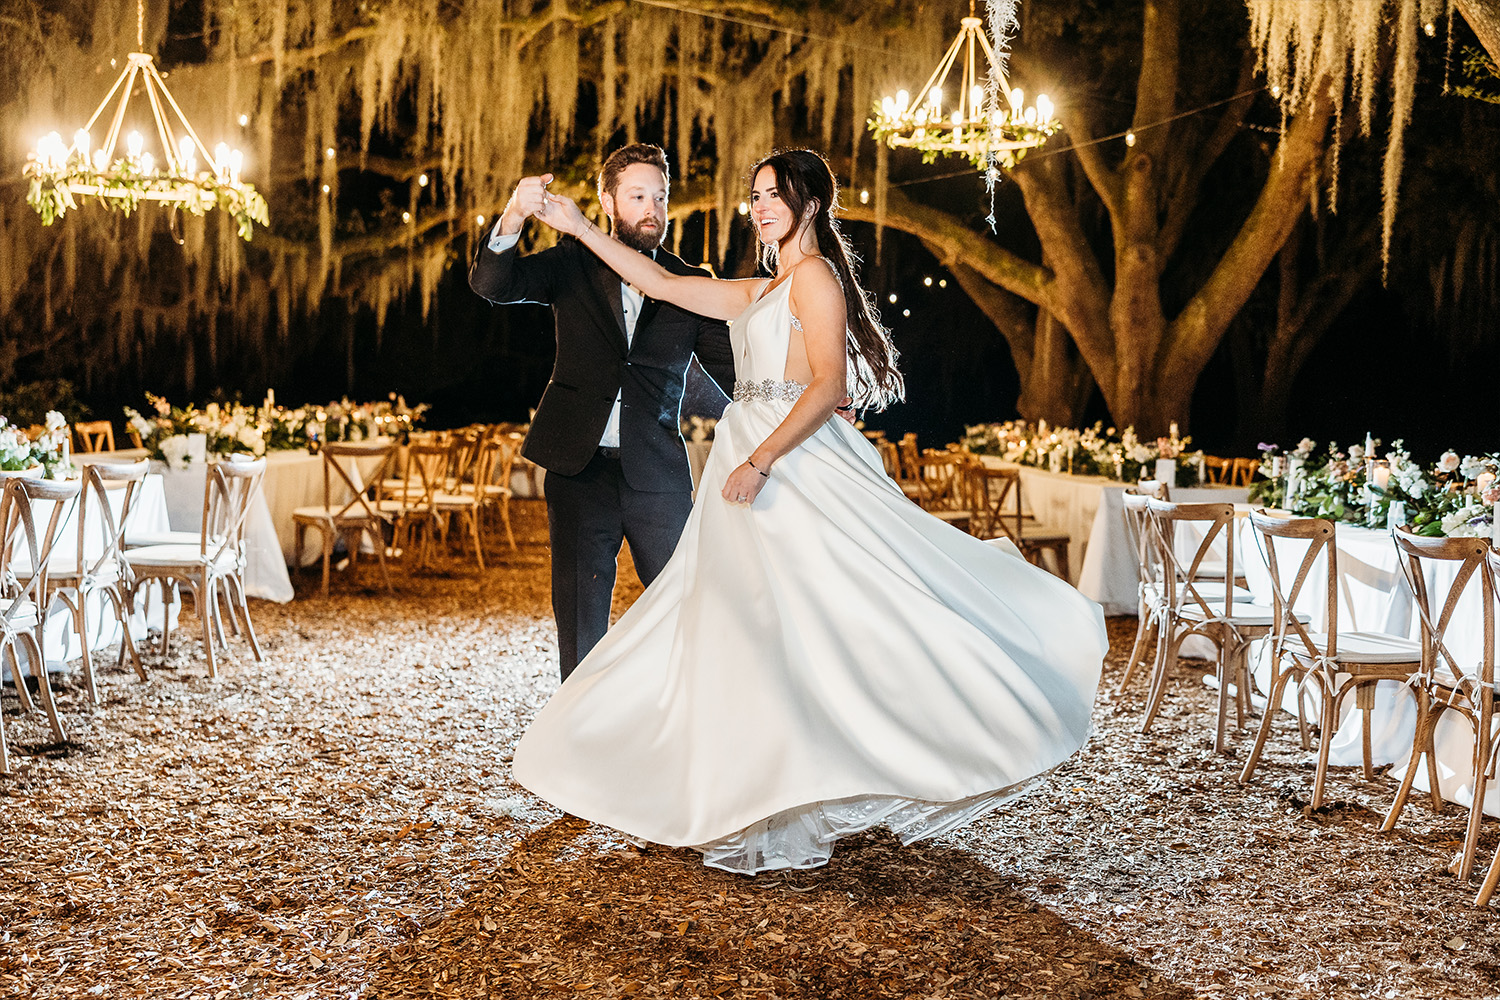 Bride and groom dancing in the center of the outdoor venue